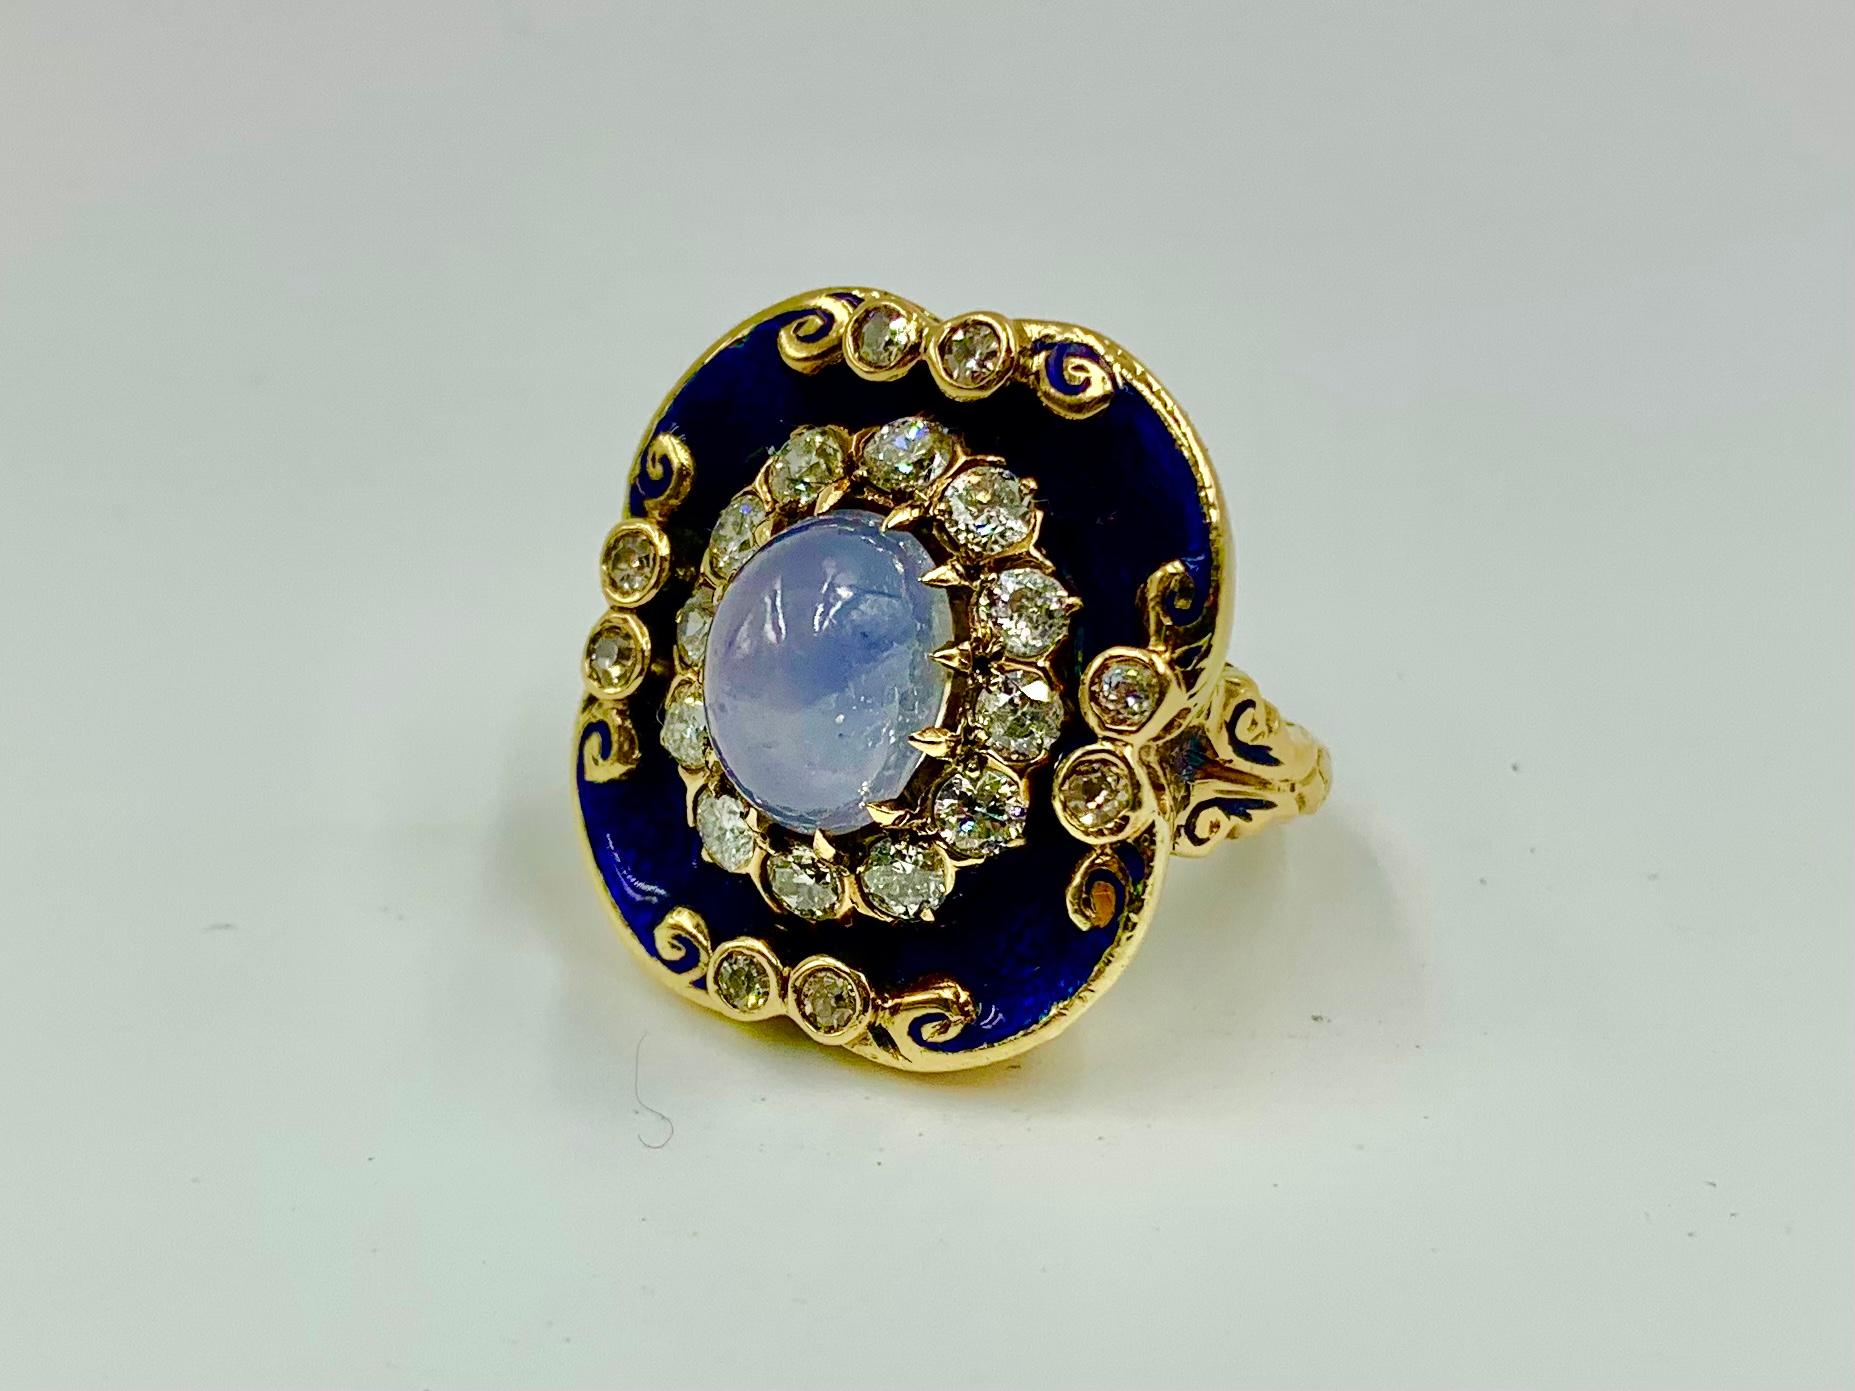 Antique Georgian Star Sapphire Diamond Guilloche Enamel 14K Gold Ring Circa 1830 In Good Condition For Sale In New York, NY